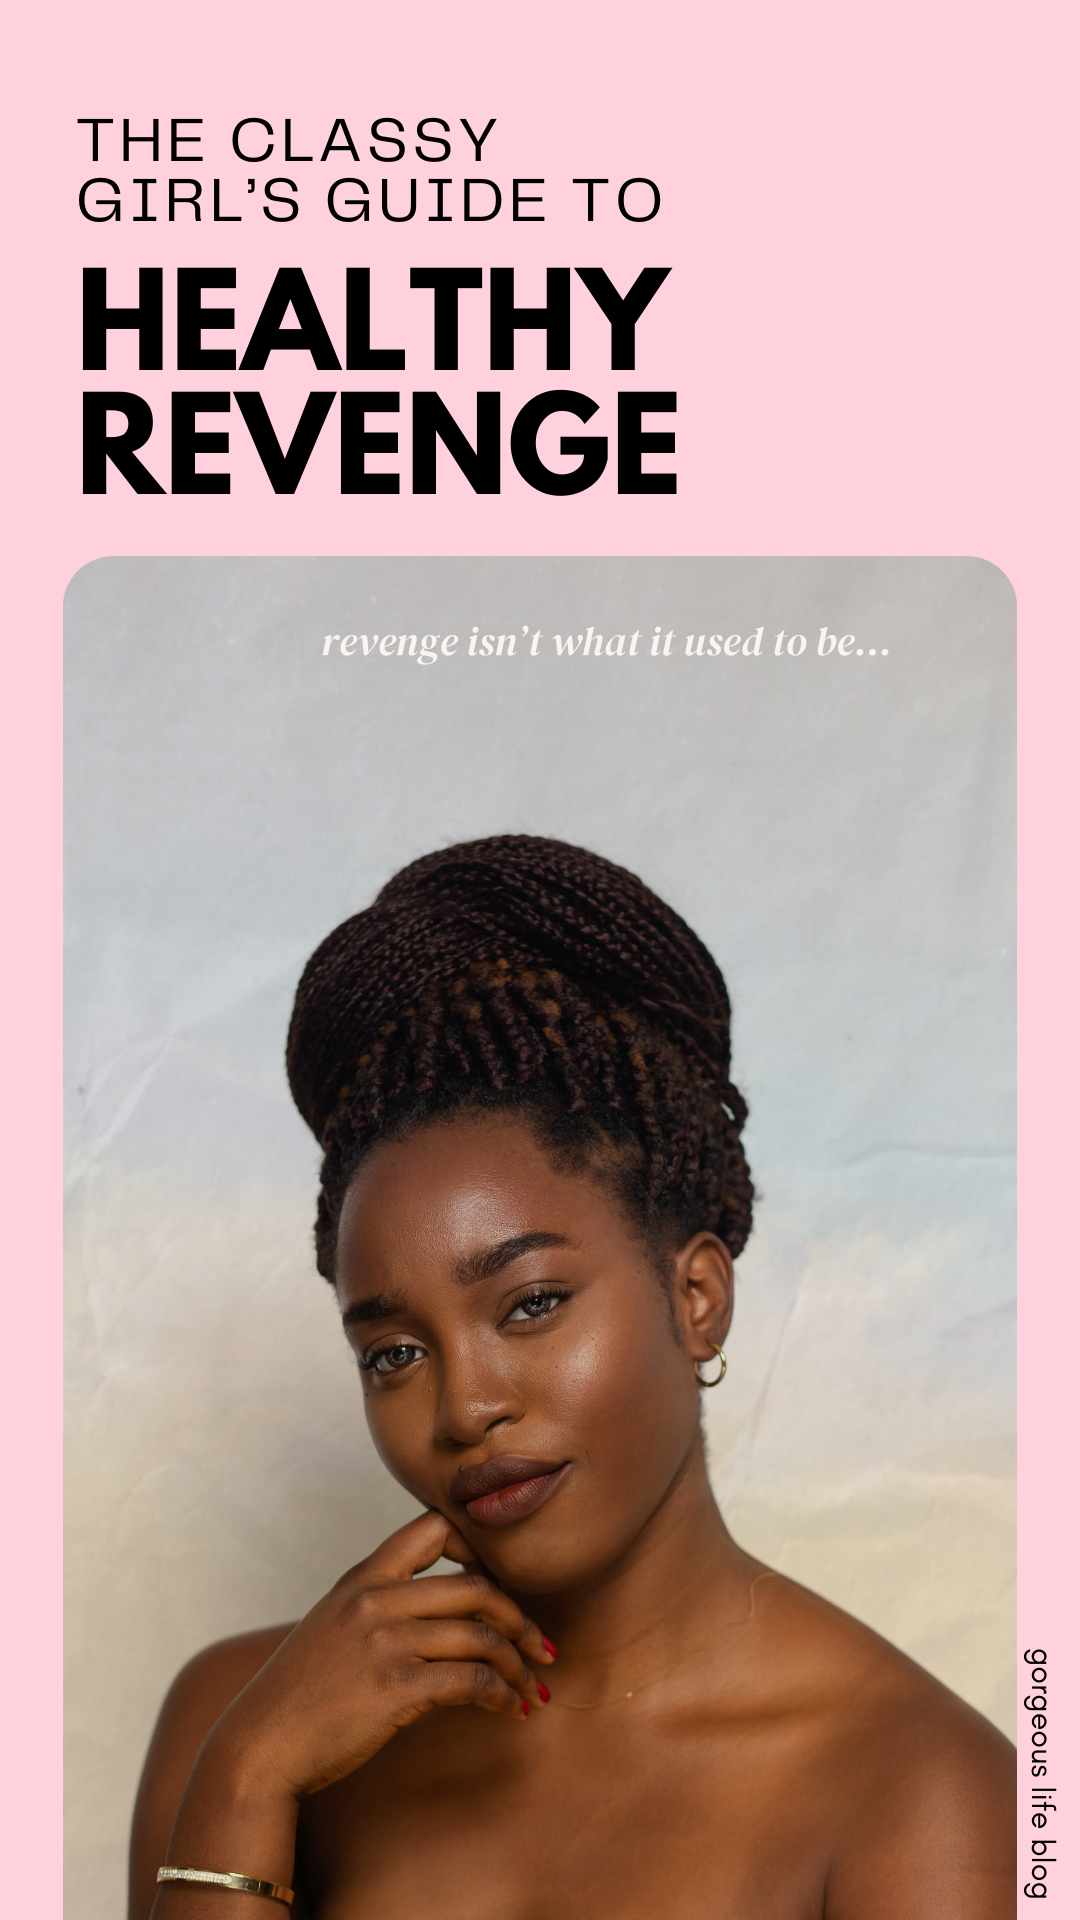 The Classy girl’s guide to healthy revenge